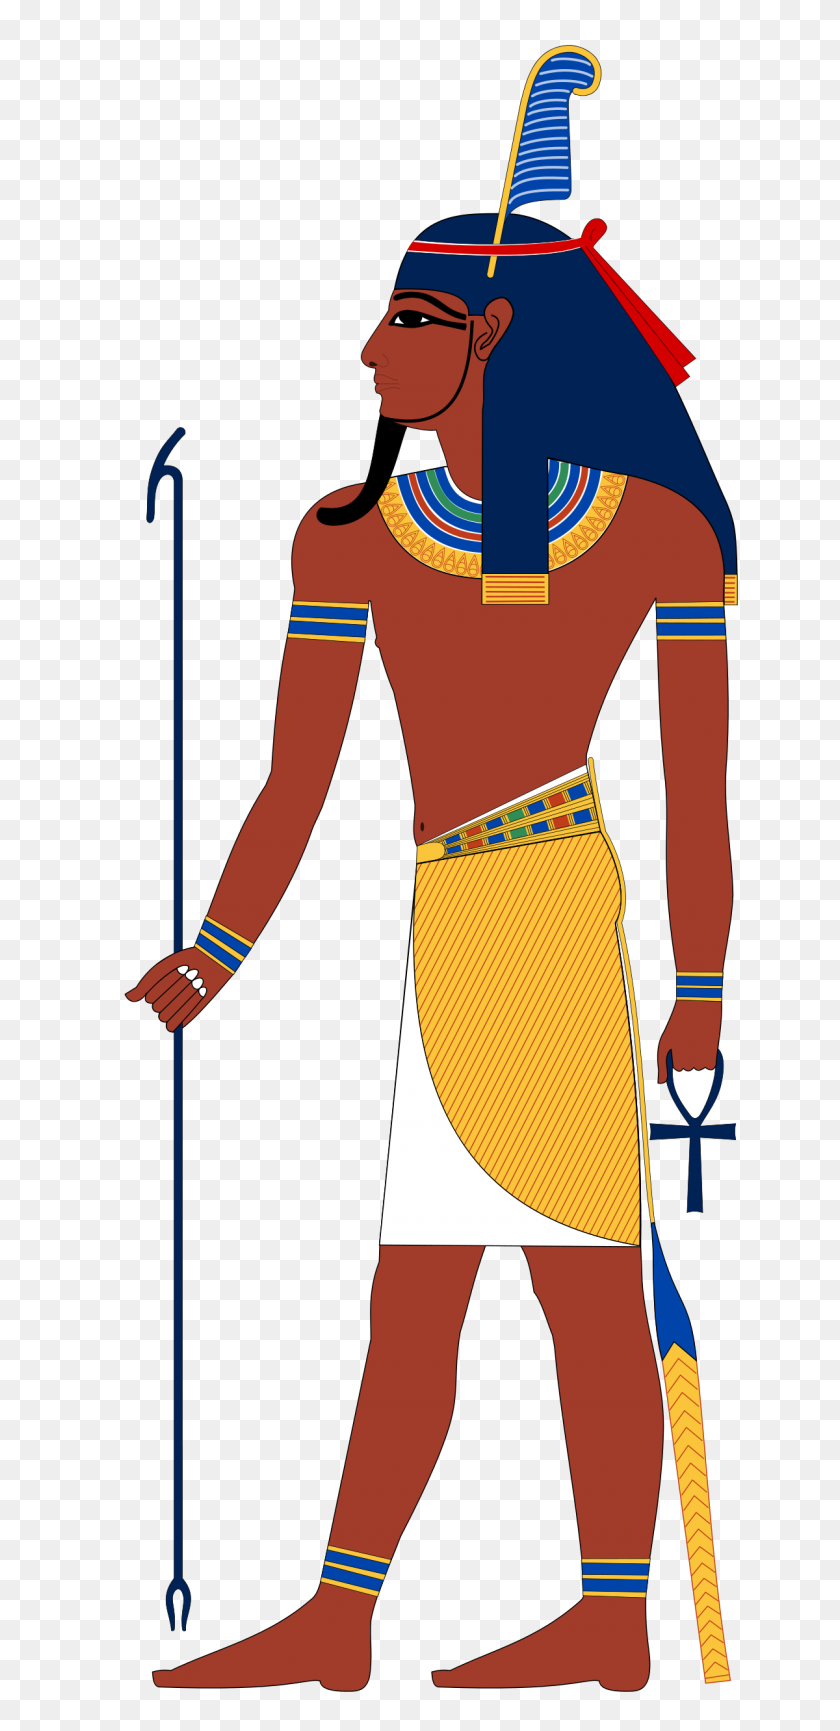 1200x2571 Ancient Egypt Clip Art Ancient Egypt, Clip Art And King Tut Mask - King Tut Clipart